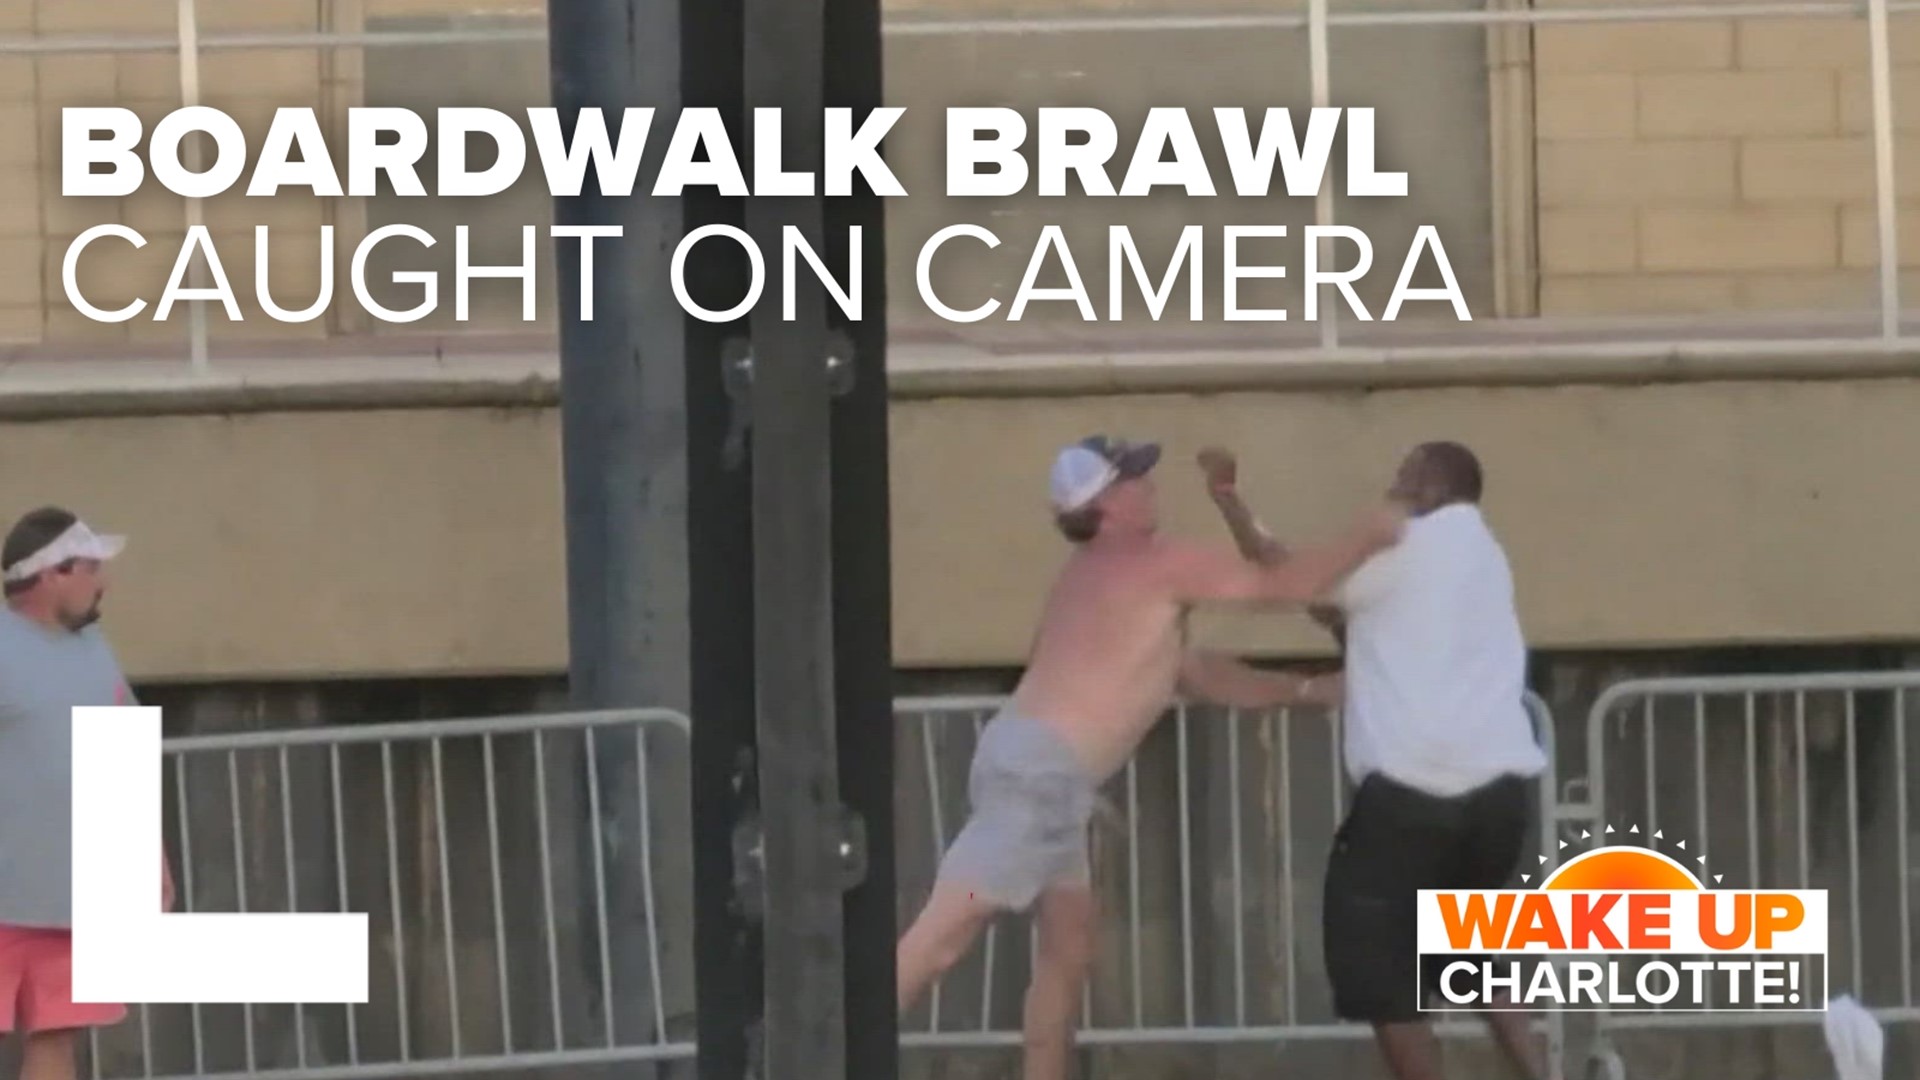 This morning we have video of the brawl that's taking social media by storm.